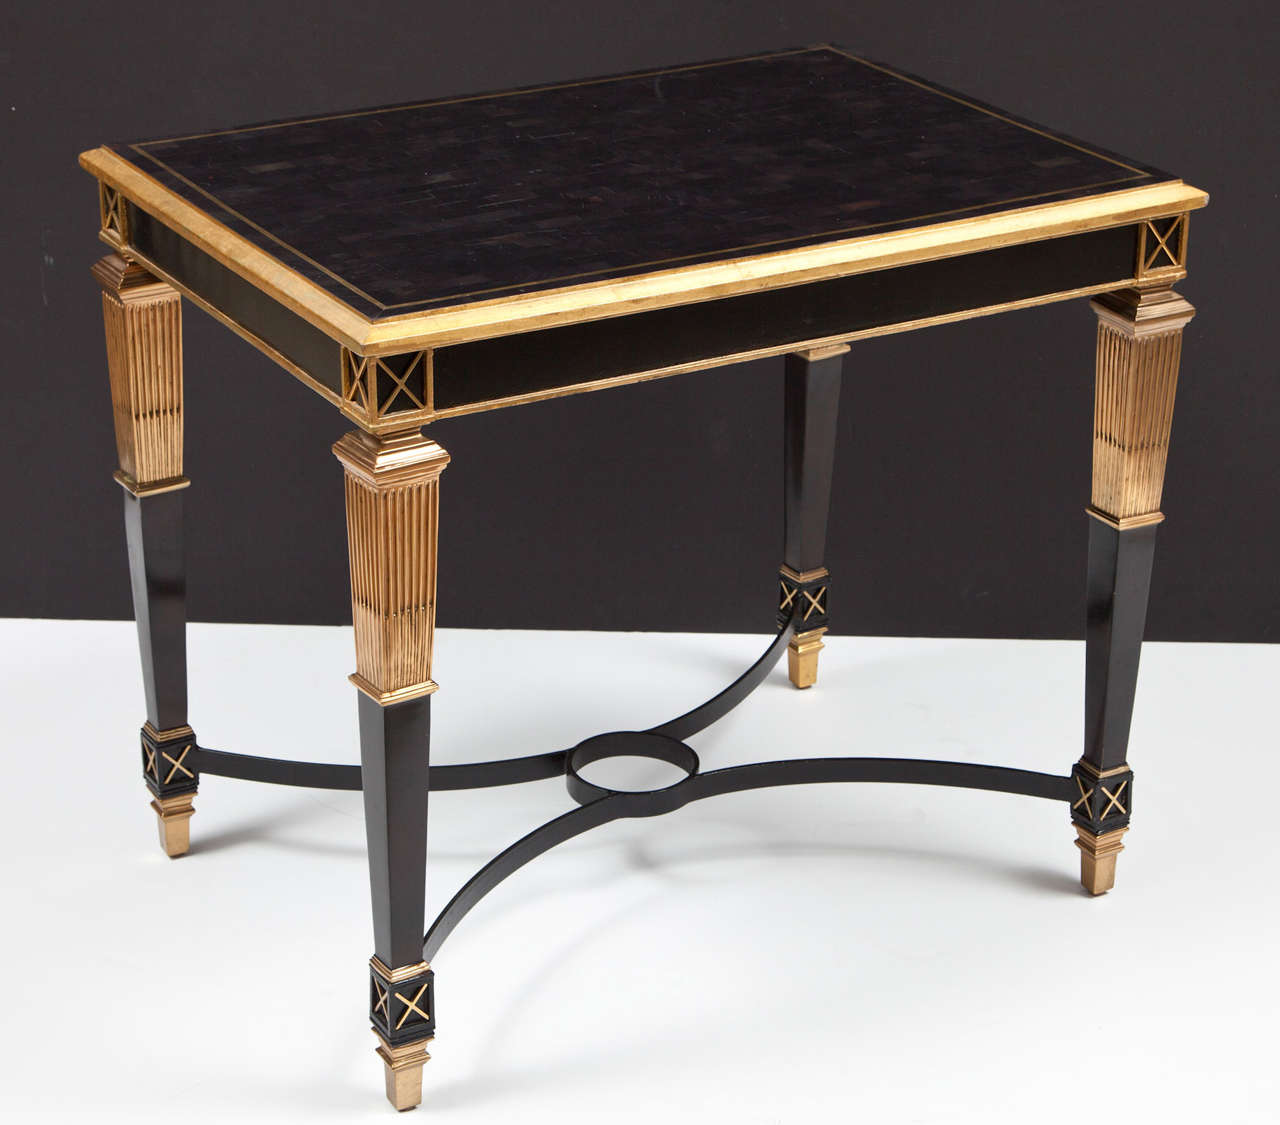 A sleek table in a high gloss finish with gilt metal accents. Perfect for a small entry, a side table or a bar.